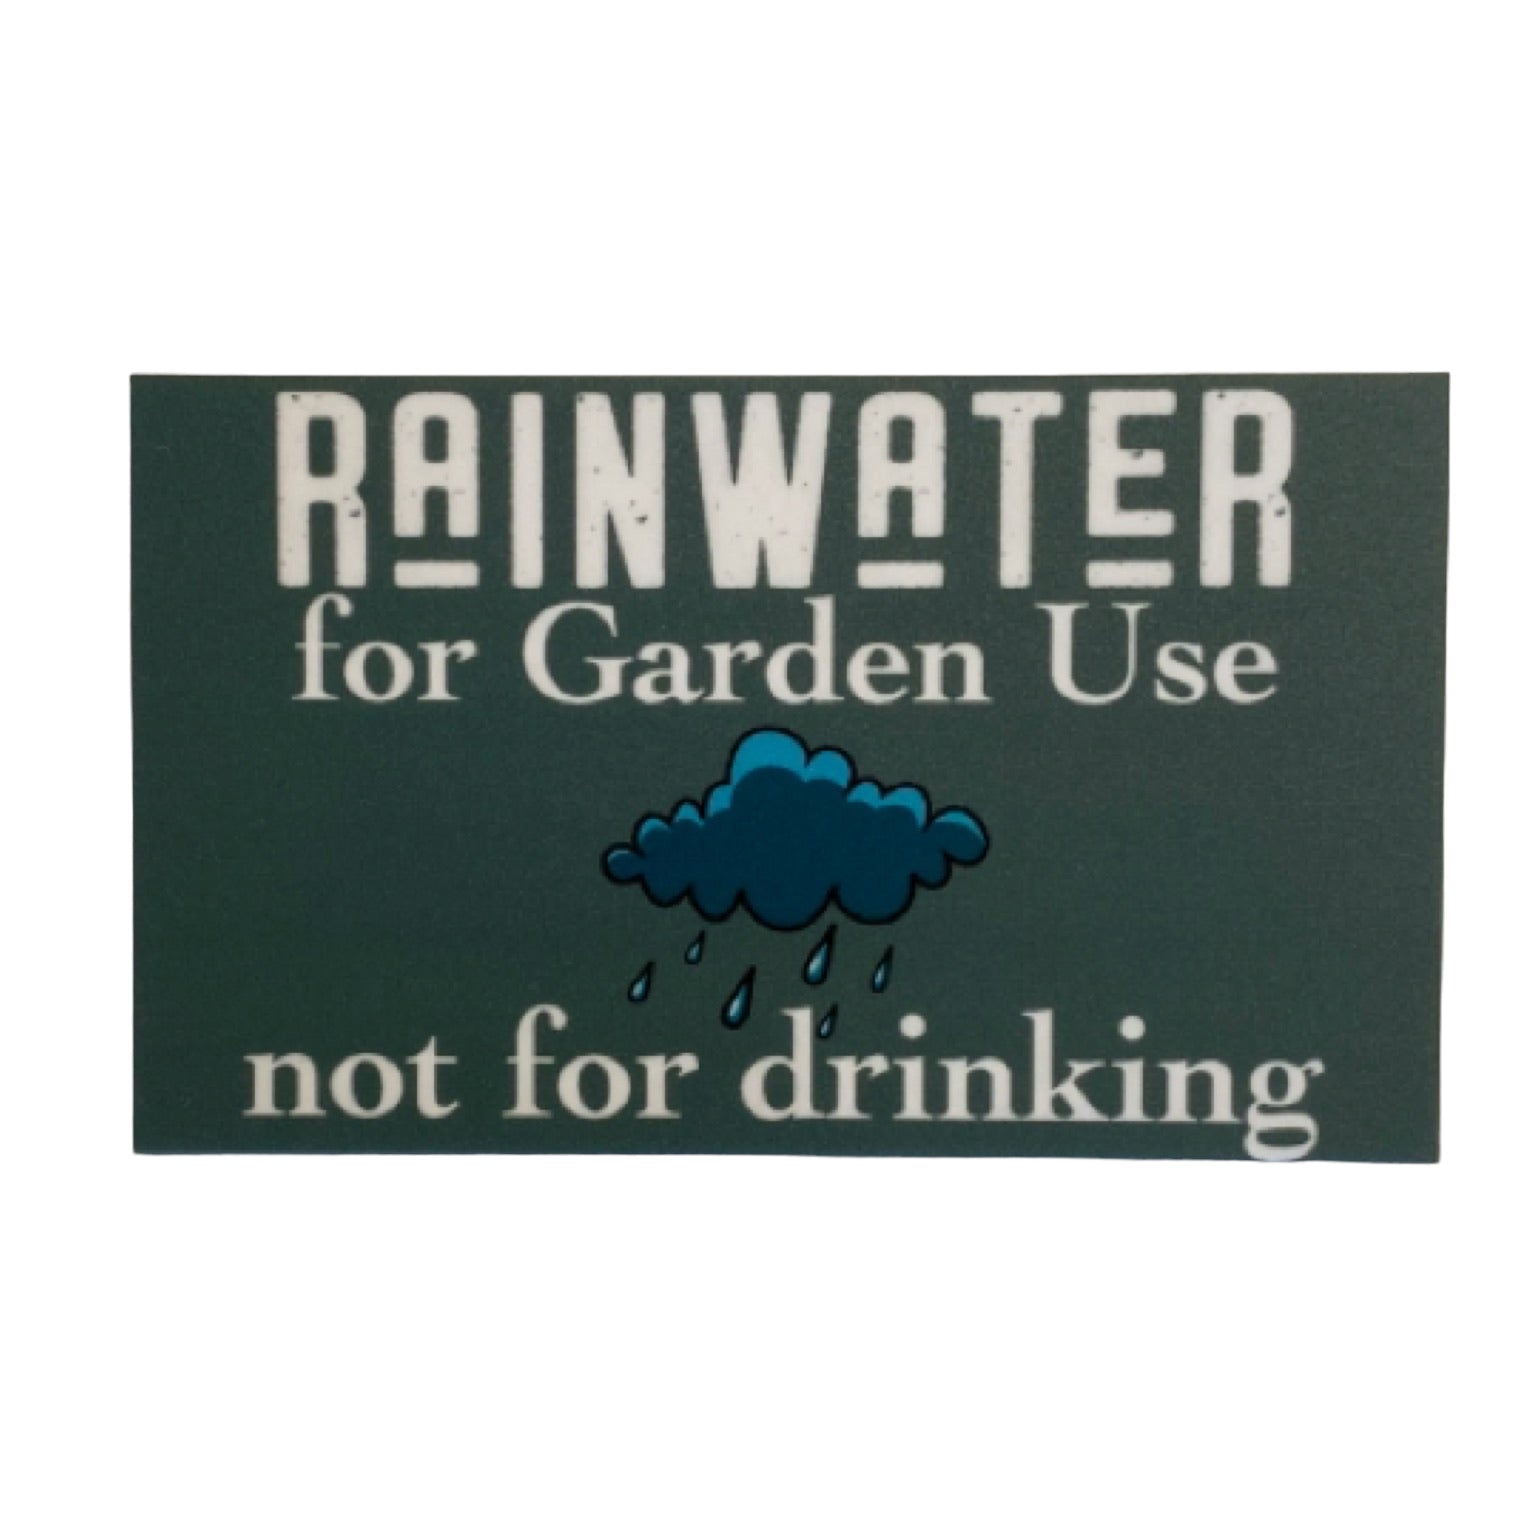 Rainwater Garden Use Not Drinking Eco Water Tank Sign - The Renmy Store Homewares & Gifts 